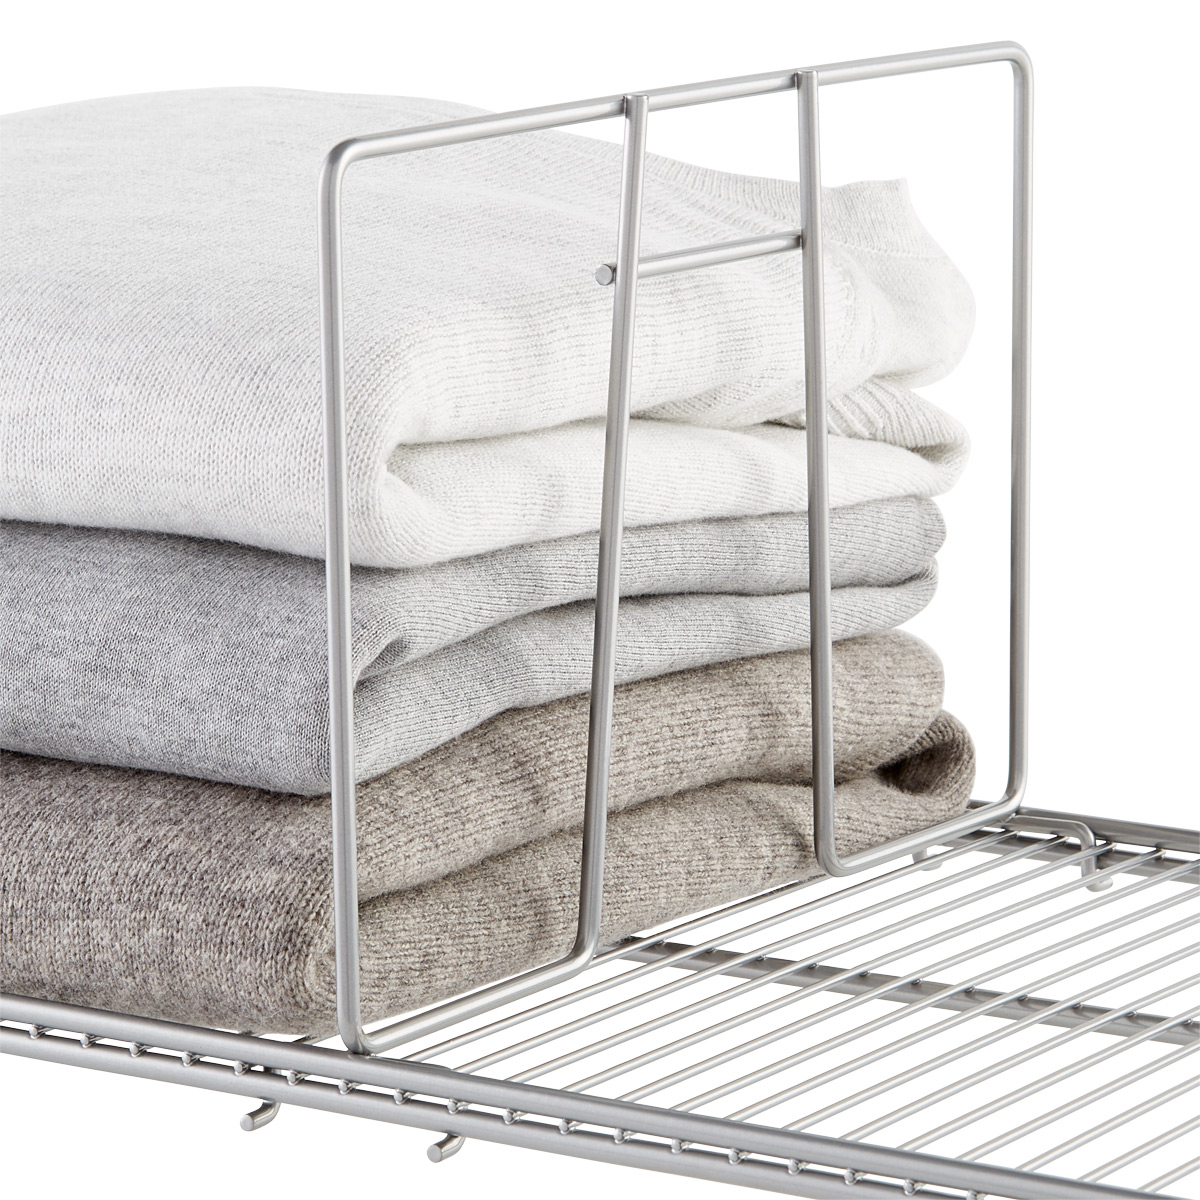 https://www.containerstore.com/catalogimages/495646/10013424-elfa-12in-Ventilated-Shelf-.jpg